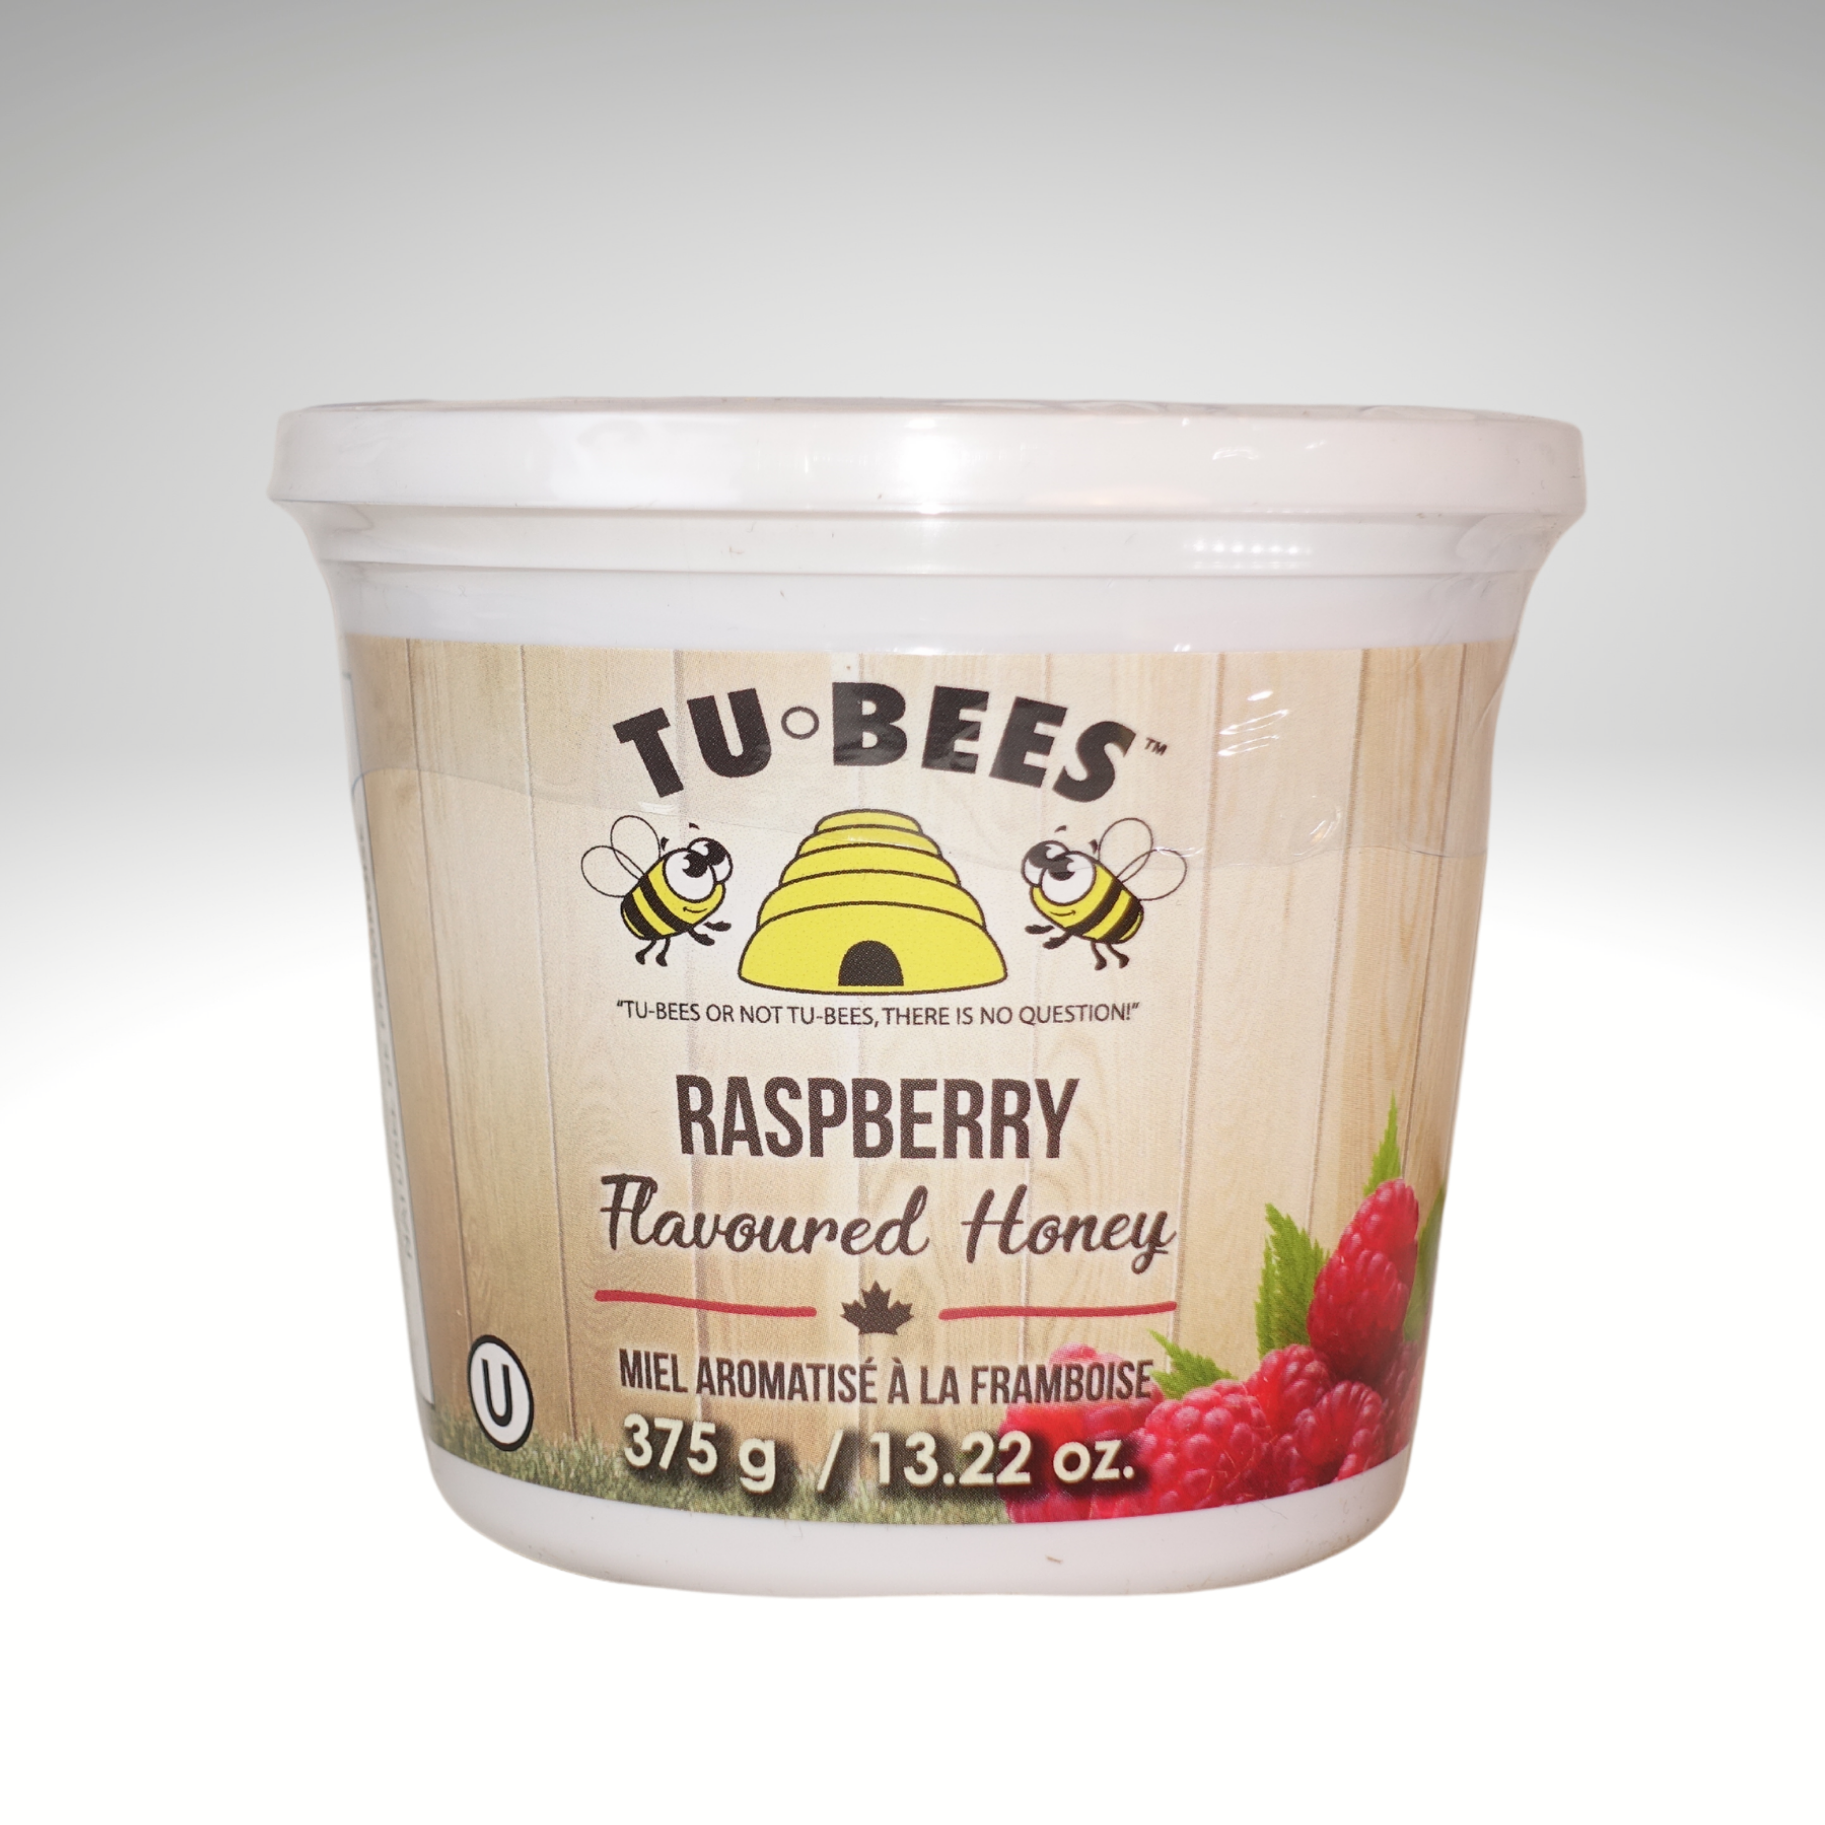 Tubees Honey, All Natural Raspberry Flavoured, OU Kosher Certified, Canadian Women owned